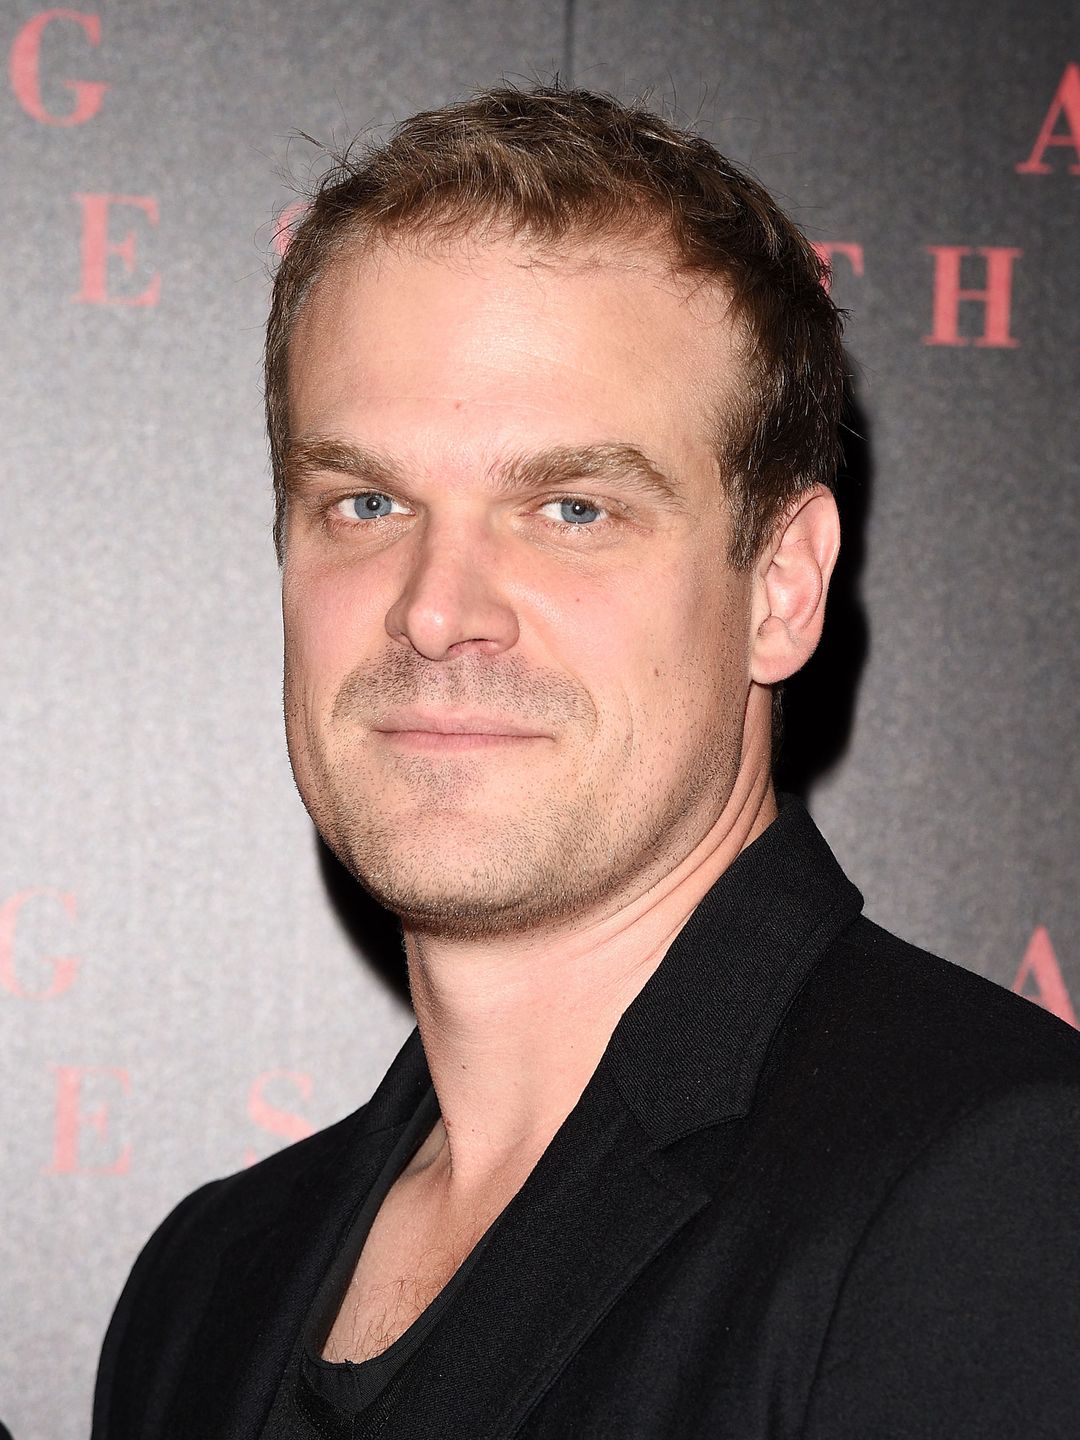 David Harbour early life